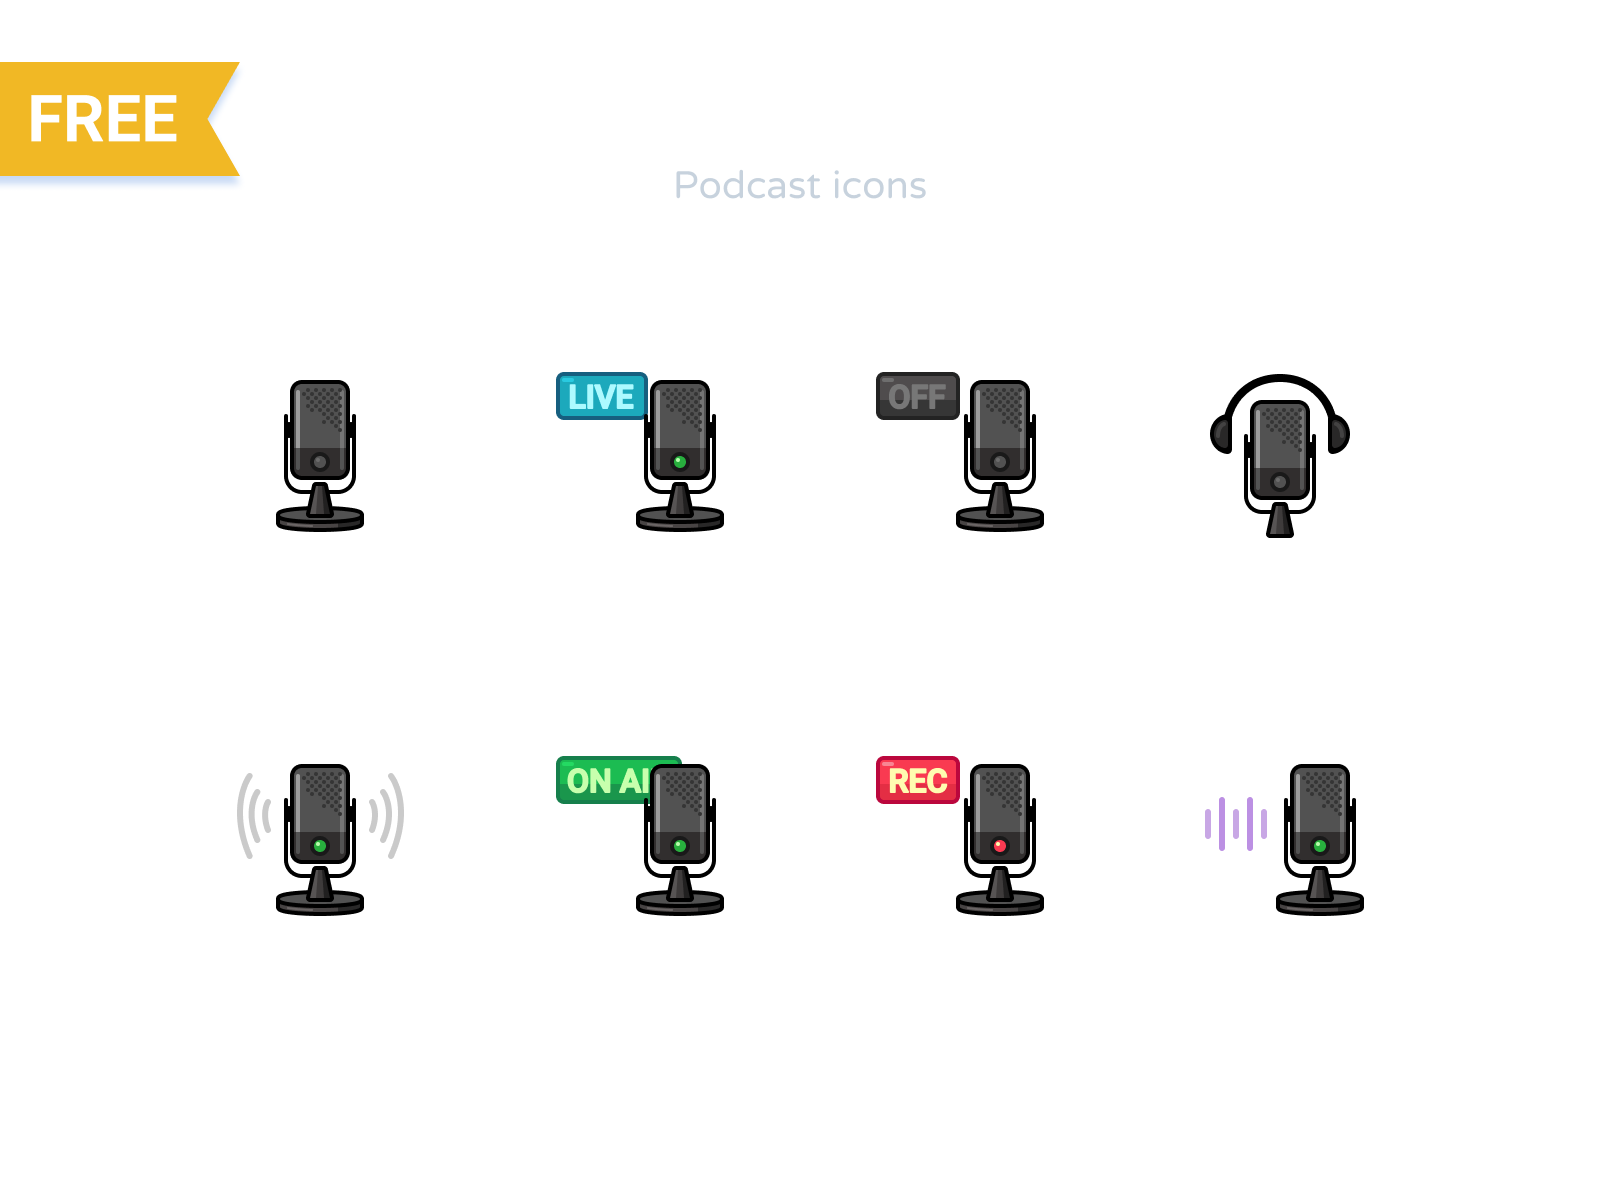 Free Podcast icons set audio channel free freebeieicons freebie freeicons icon design icons live livestream mic micriphone onair podcast rec record rode stream vector